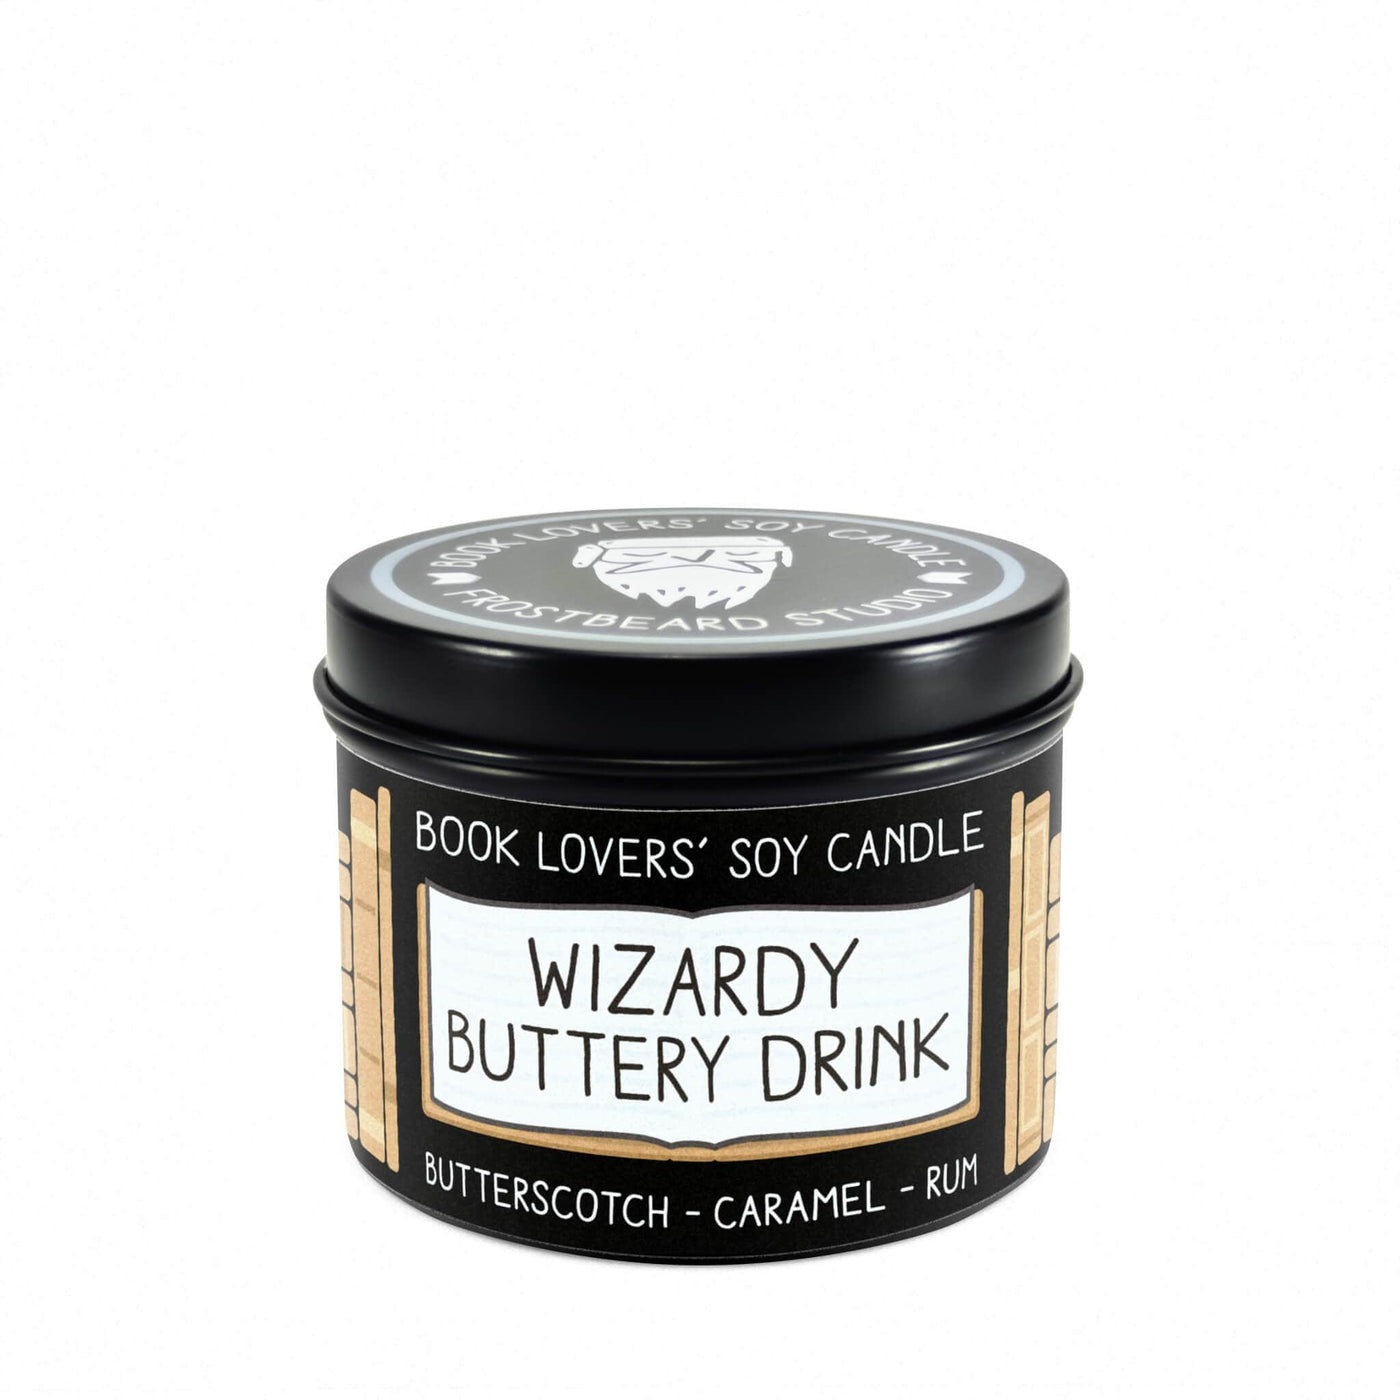 Wizardy Buttery Drink - 4 oz Tin - Book Lovers' Soy Candle - Frostbeard Studio